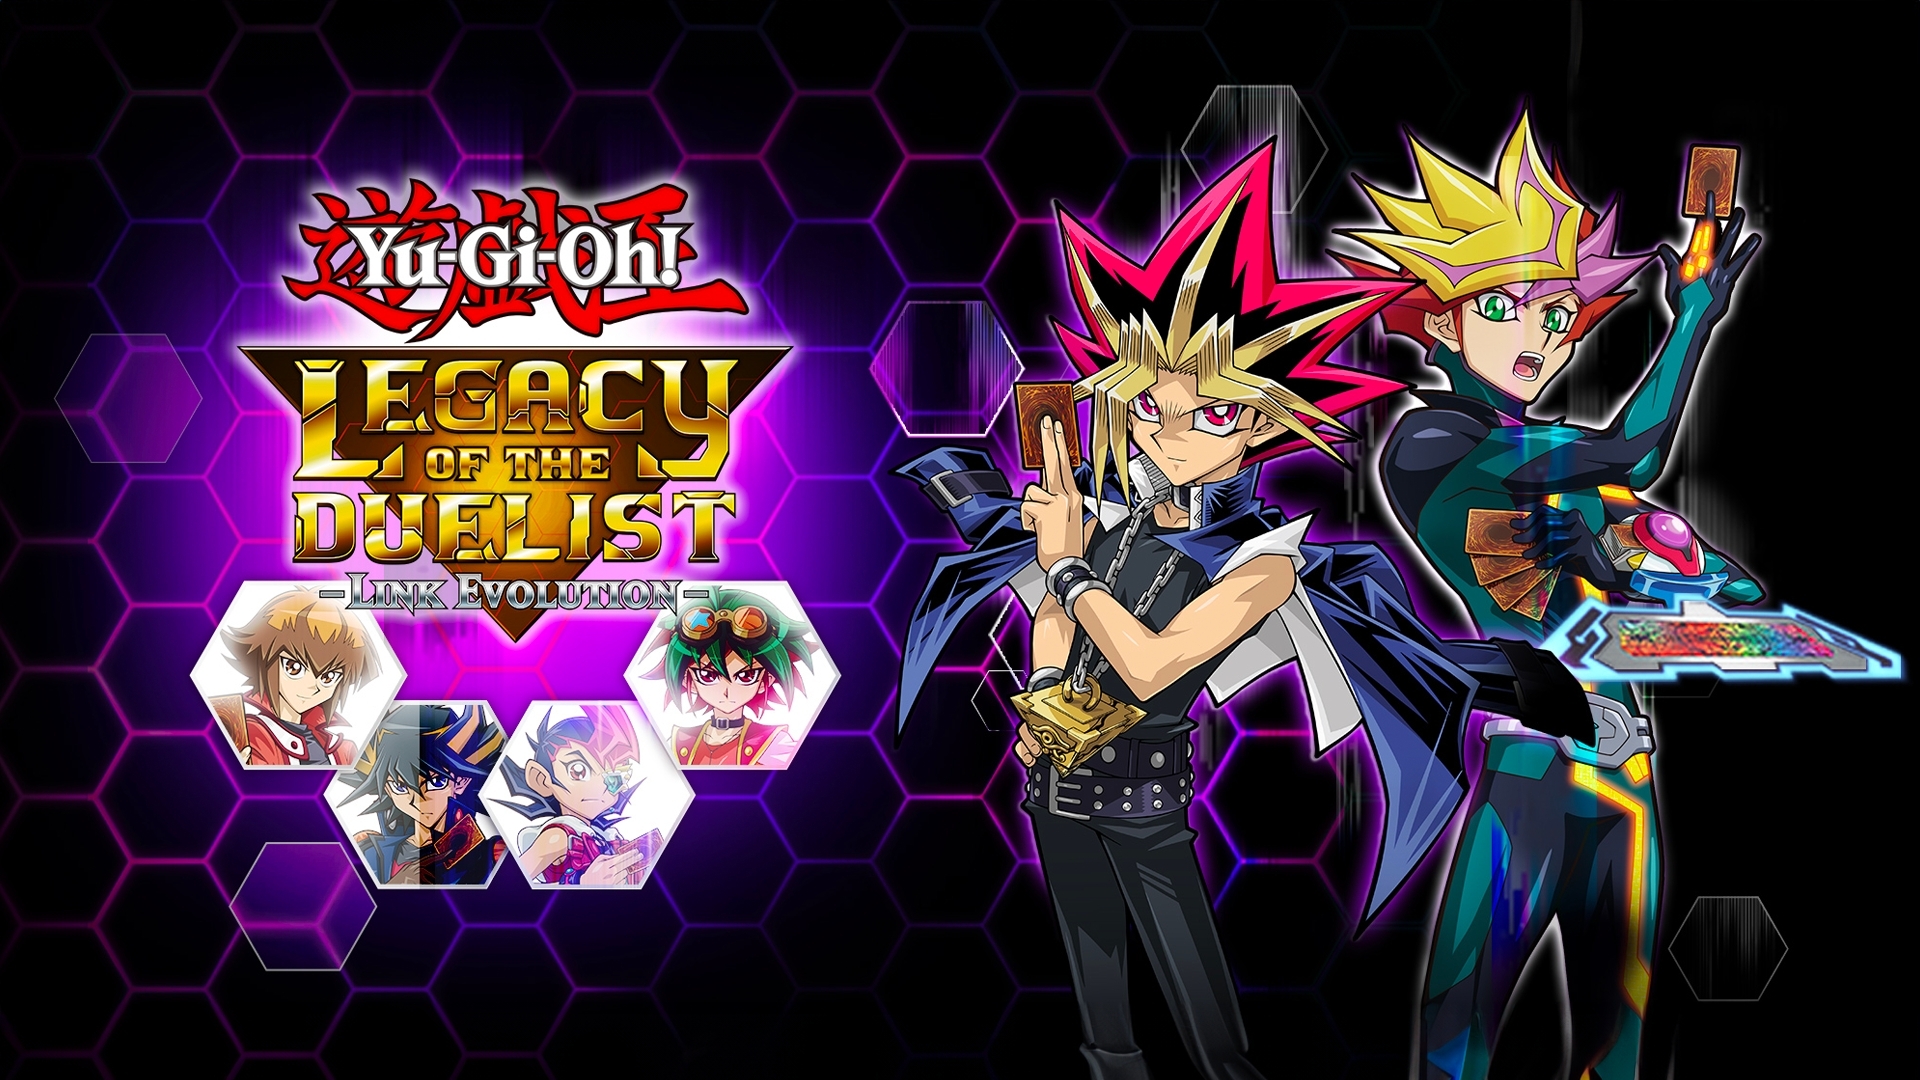 yu-gi-oh-legacy-of-the-duelist-link-evolution-cover.jpg